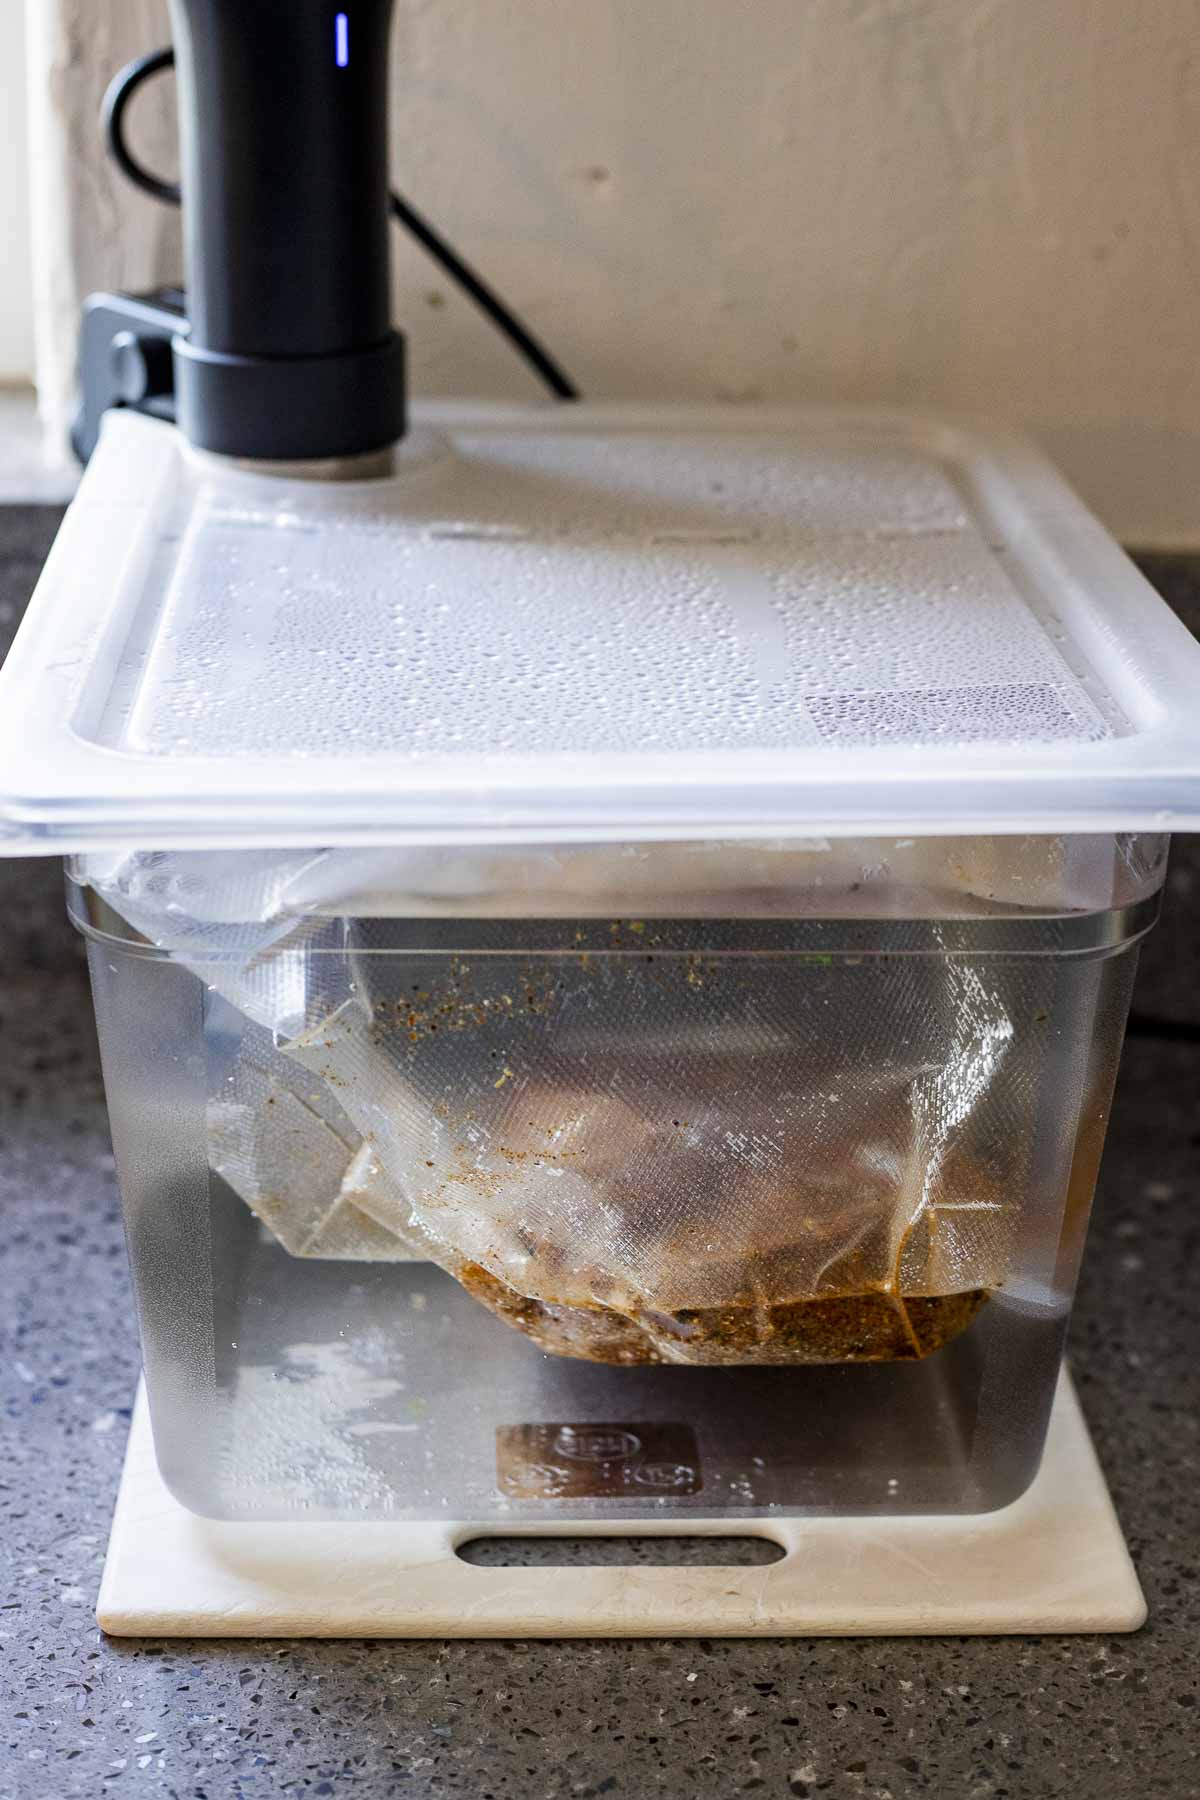 Pastrami cooking in a sous vide water bath.